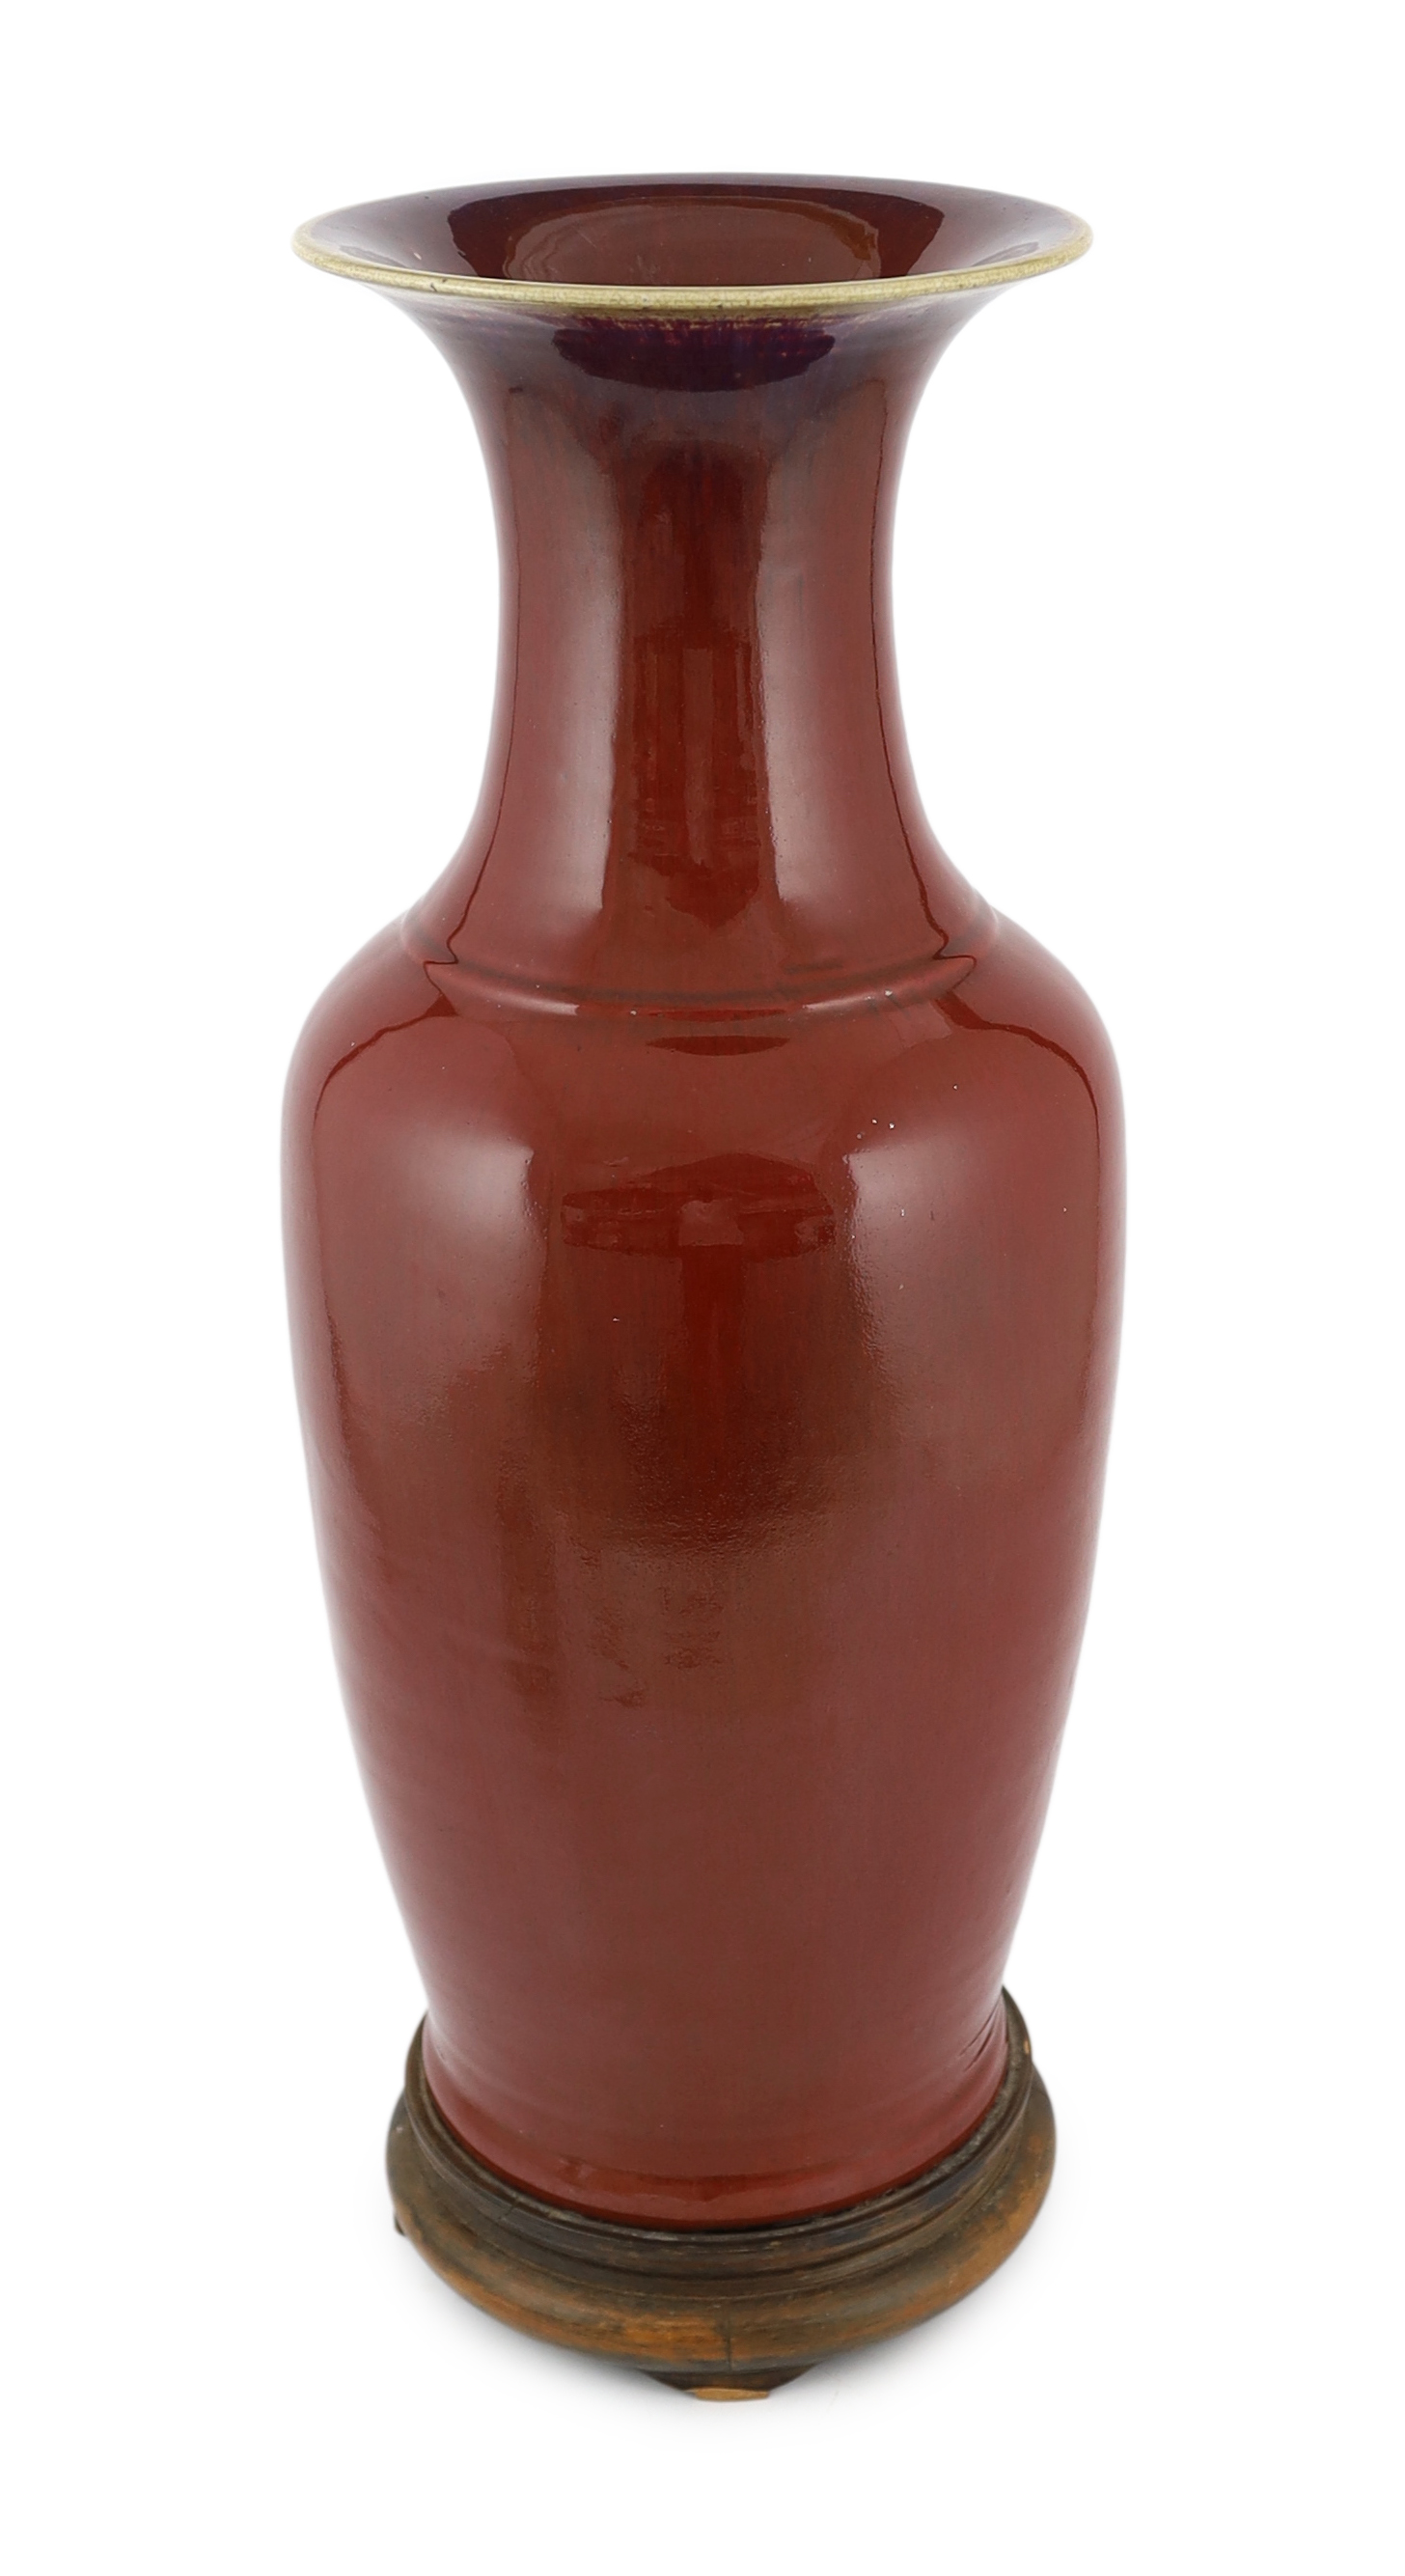 A large Chinese sang de boeuf glazed vase, early 20th century, small chip losses around the edge of the foot